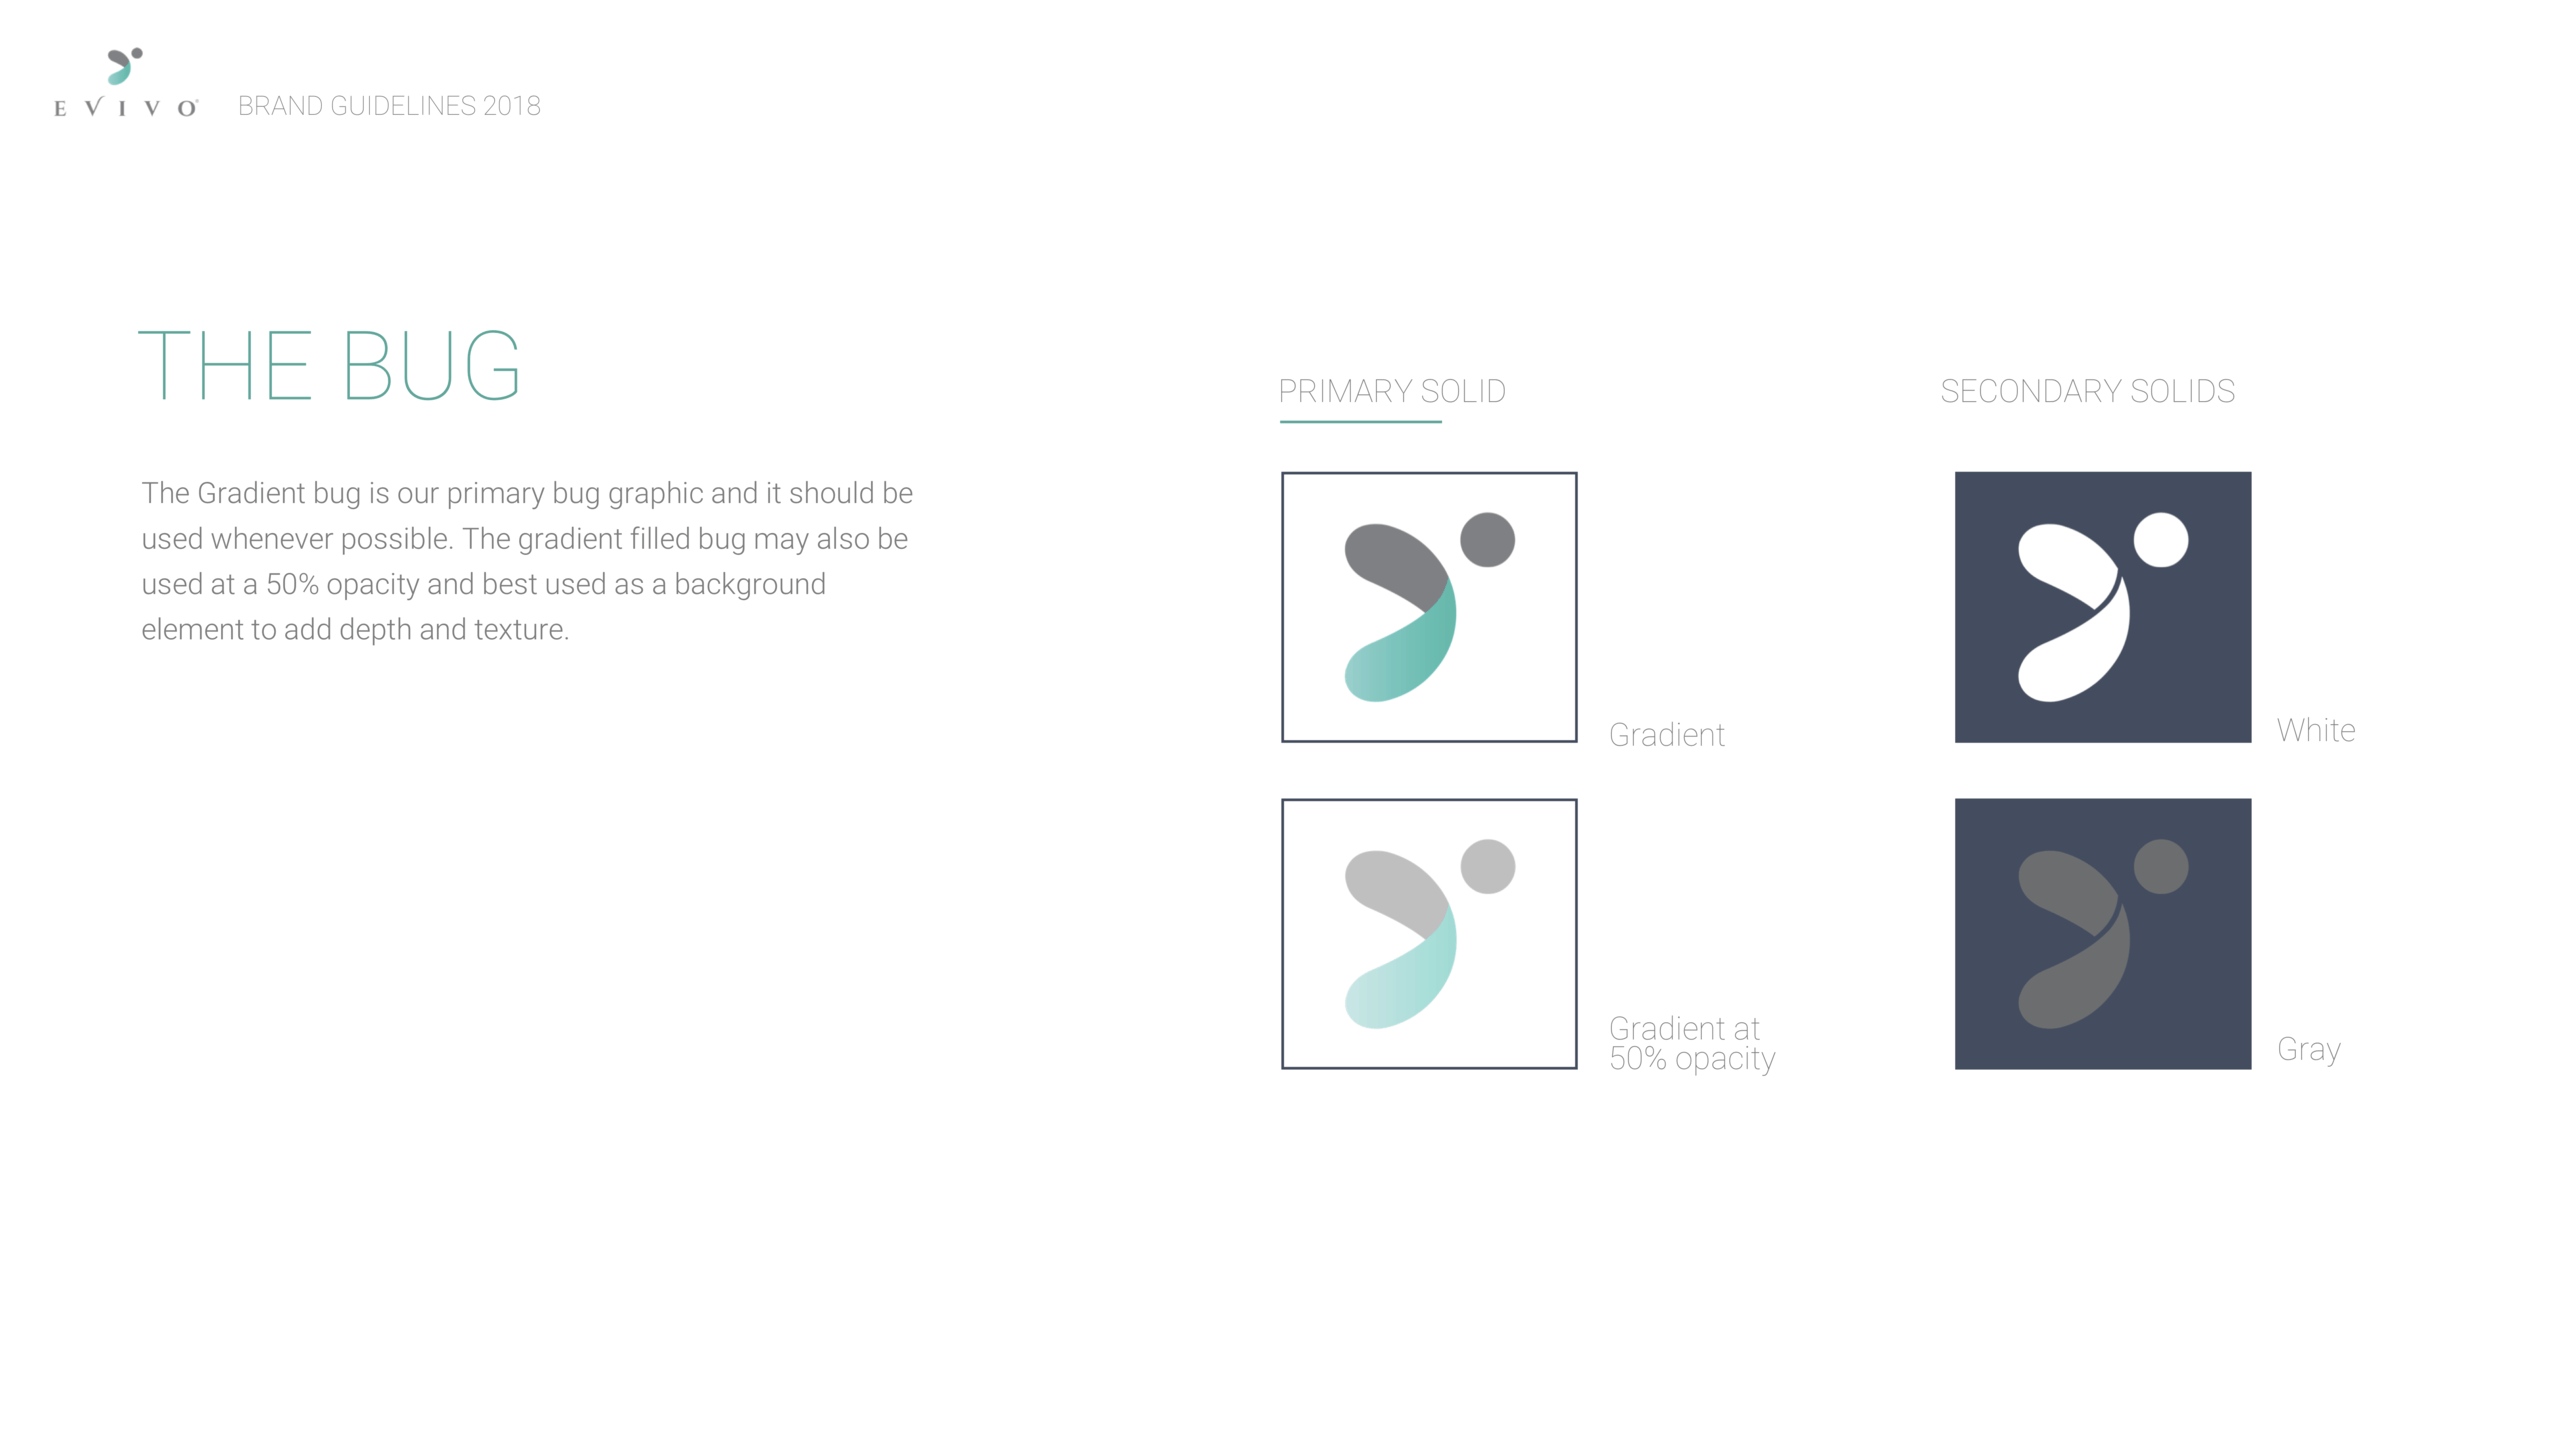 Evivo Brand Guidelines Image 2